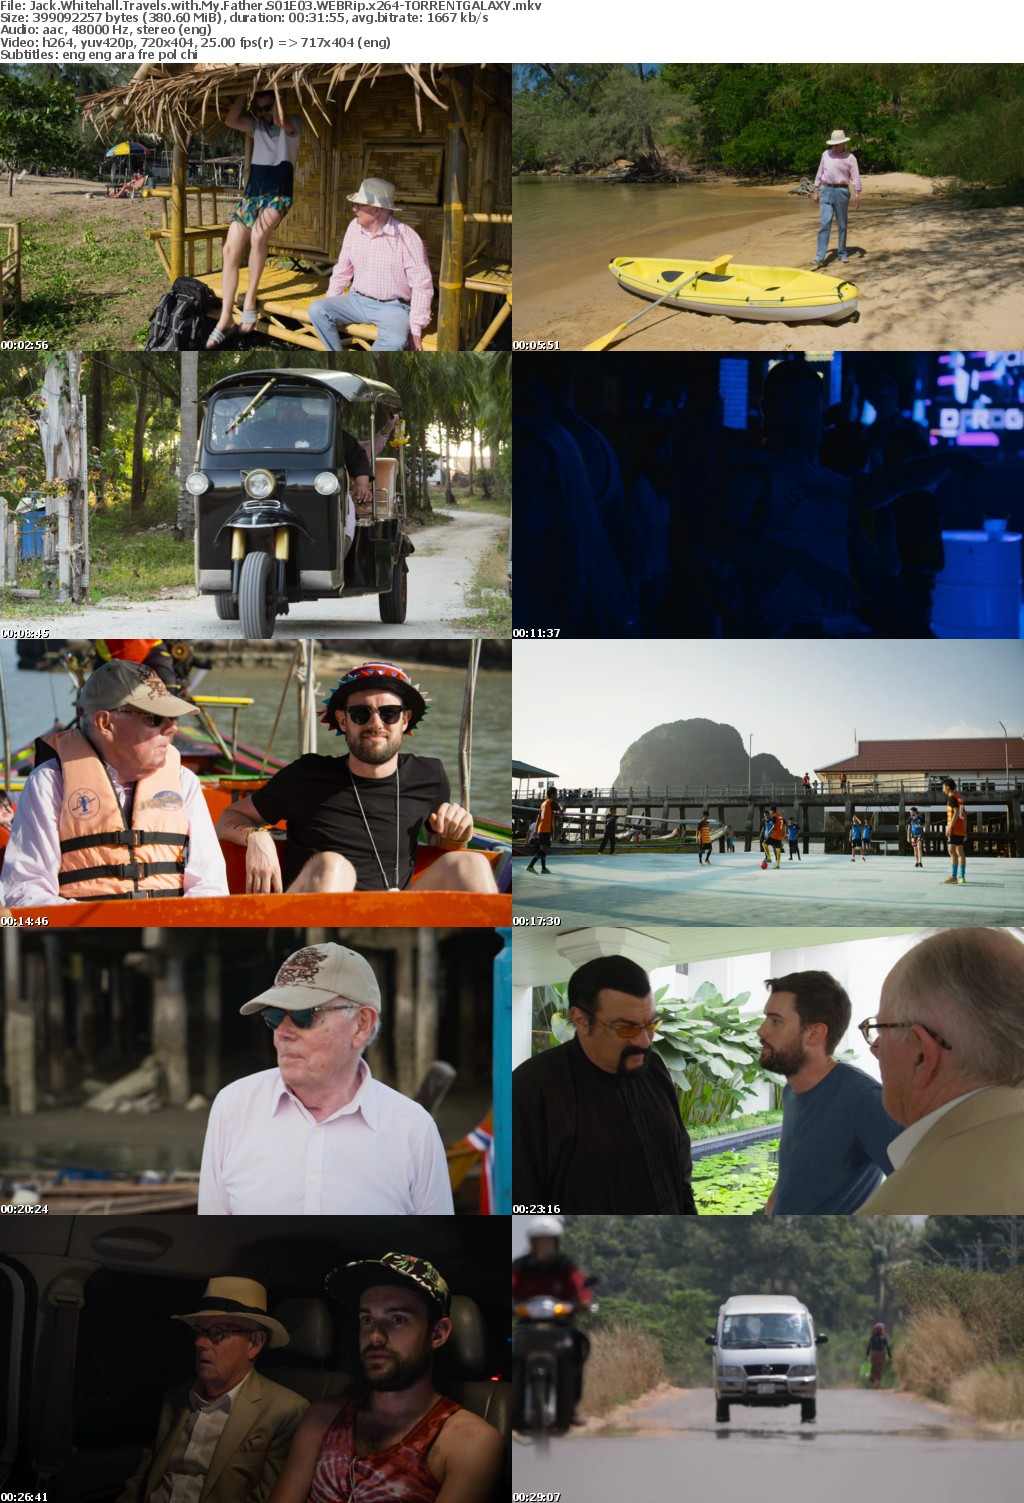 Jack Whitehall Travels with My Father S01E03 WEBRip x264-GALAXY